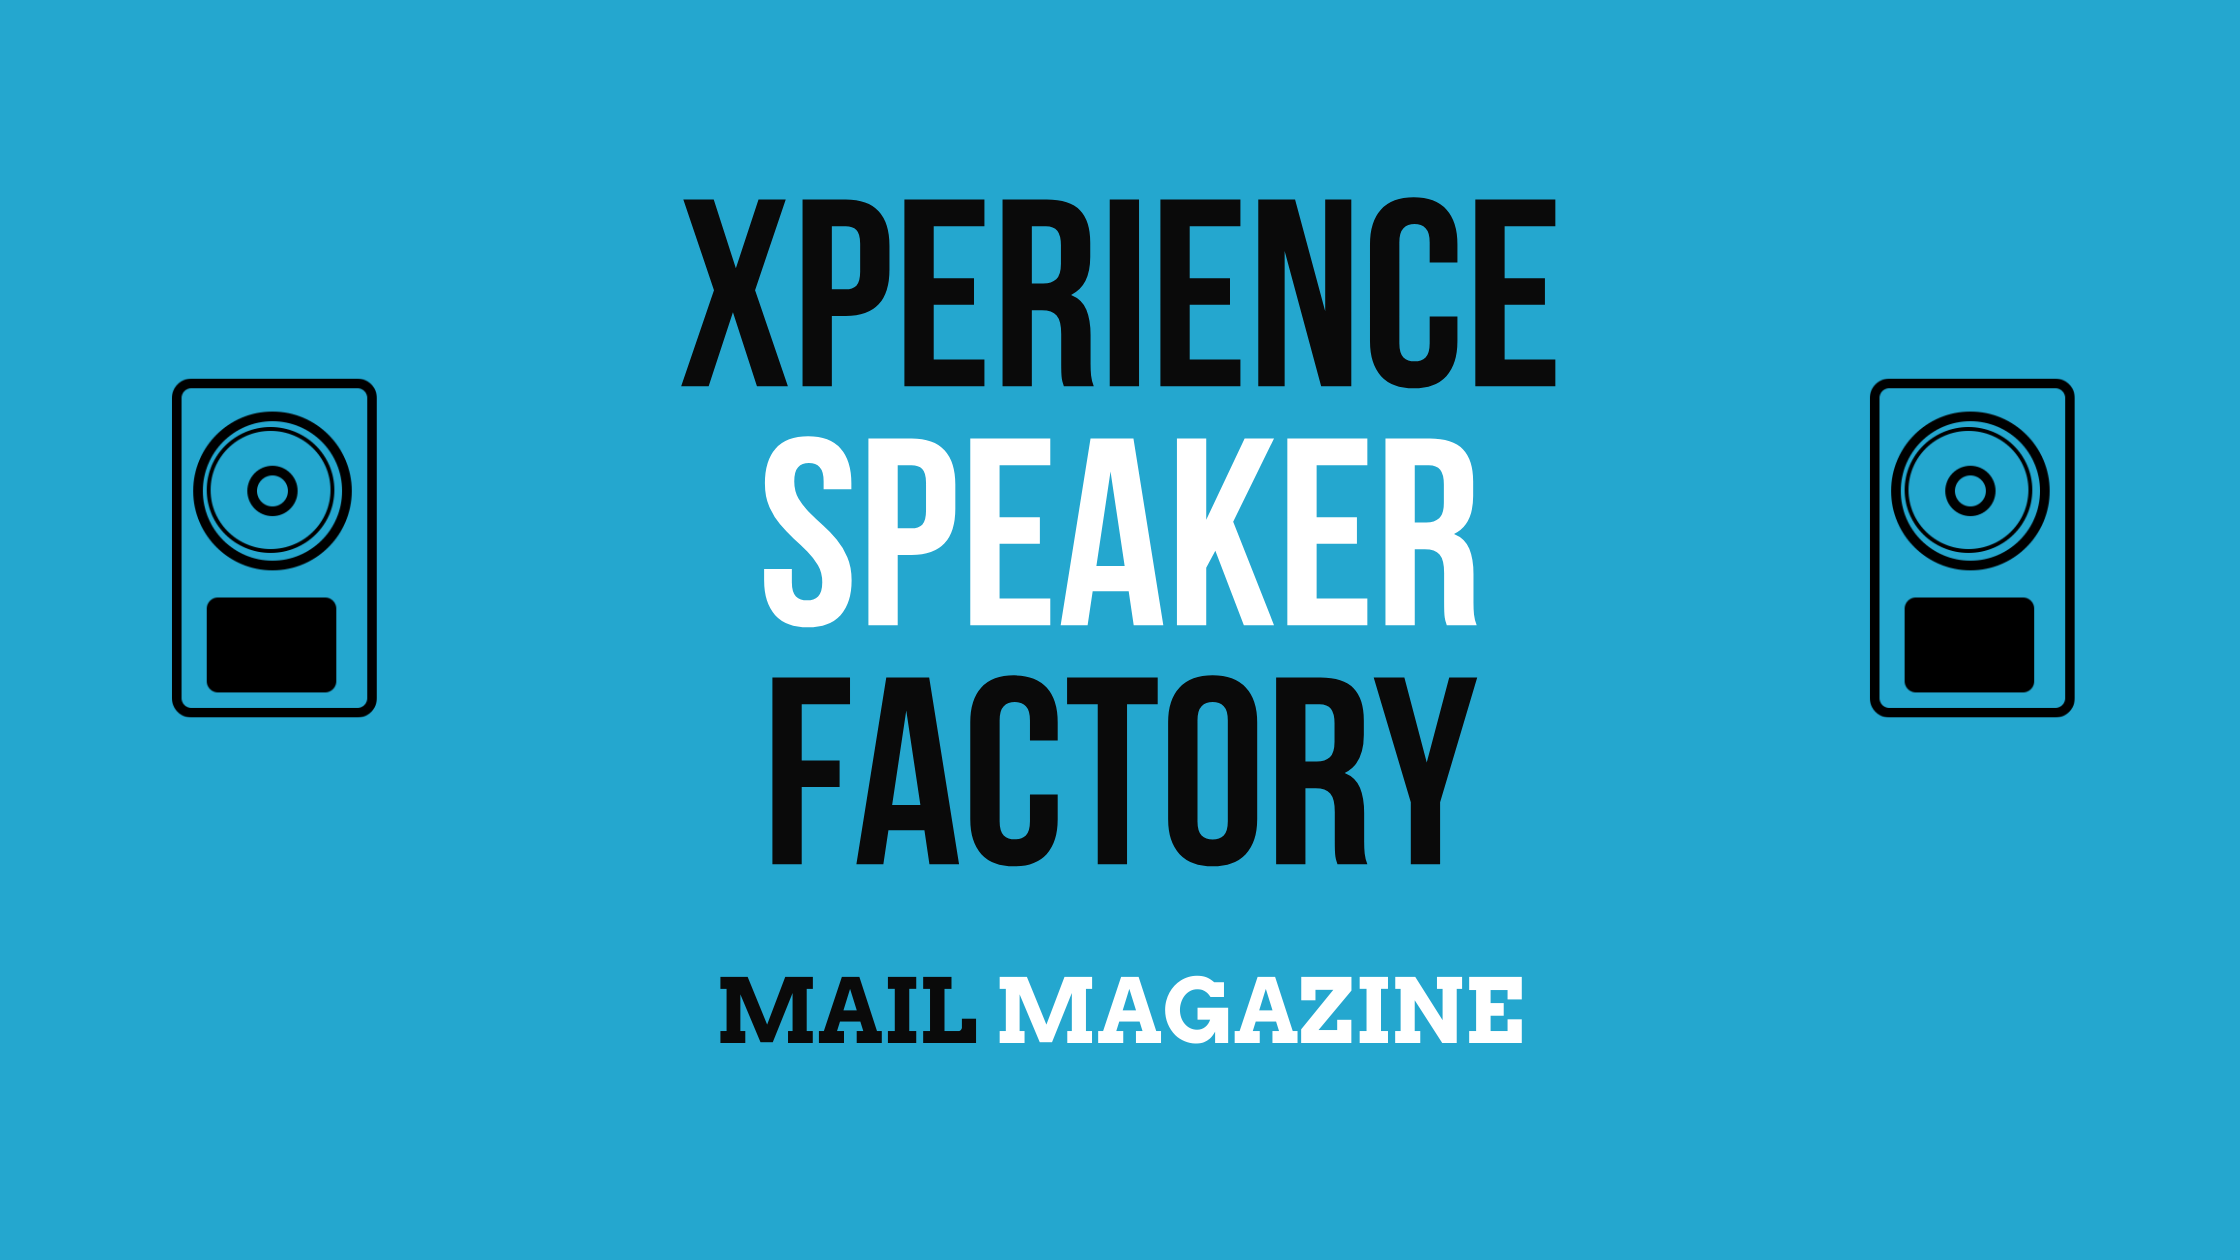 Speaker Factory | Xperience